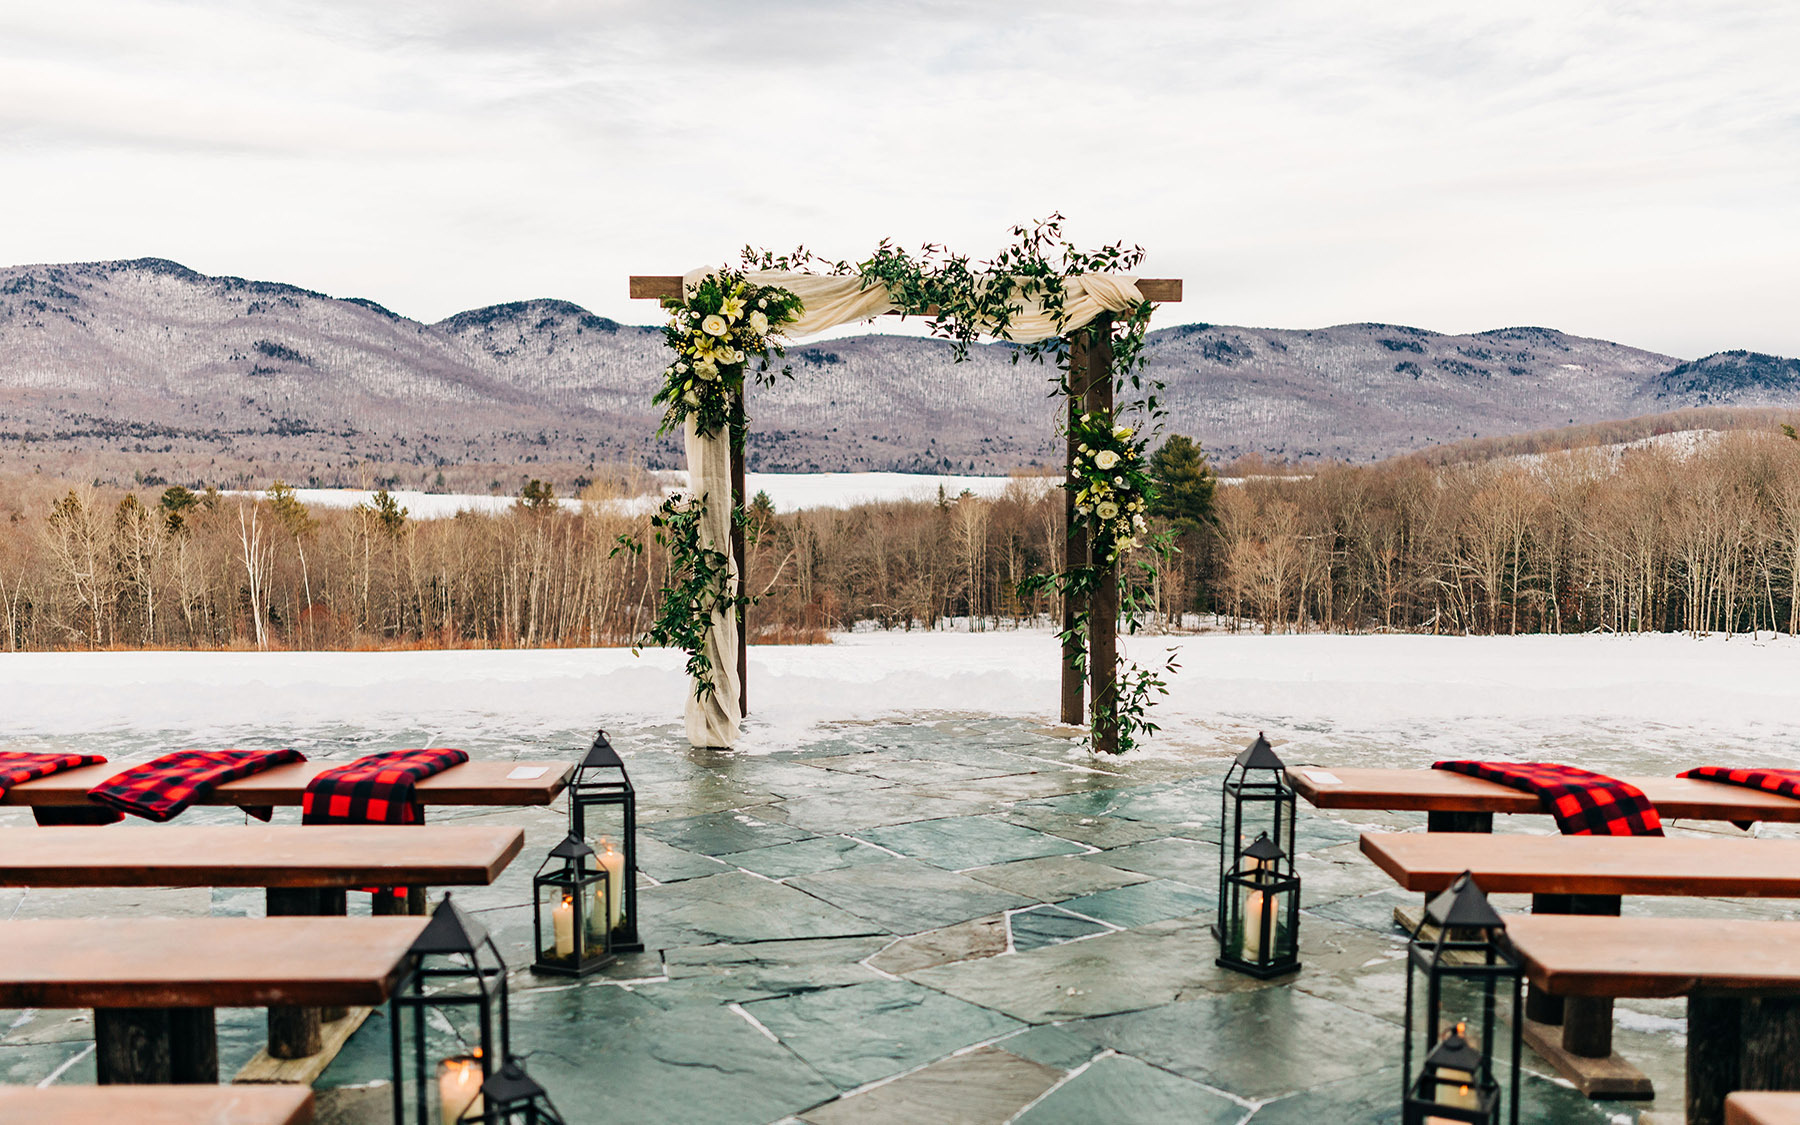 Wedding arch with flowers on it in front of empty seats with scarves and lanterns on seats with snowy mountain in background at Mountain Top Inn & Resort in Chittenden, VT